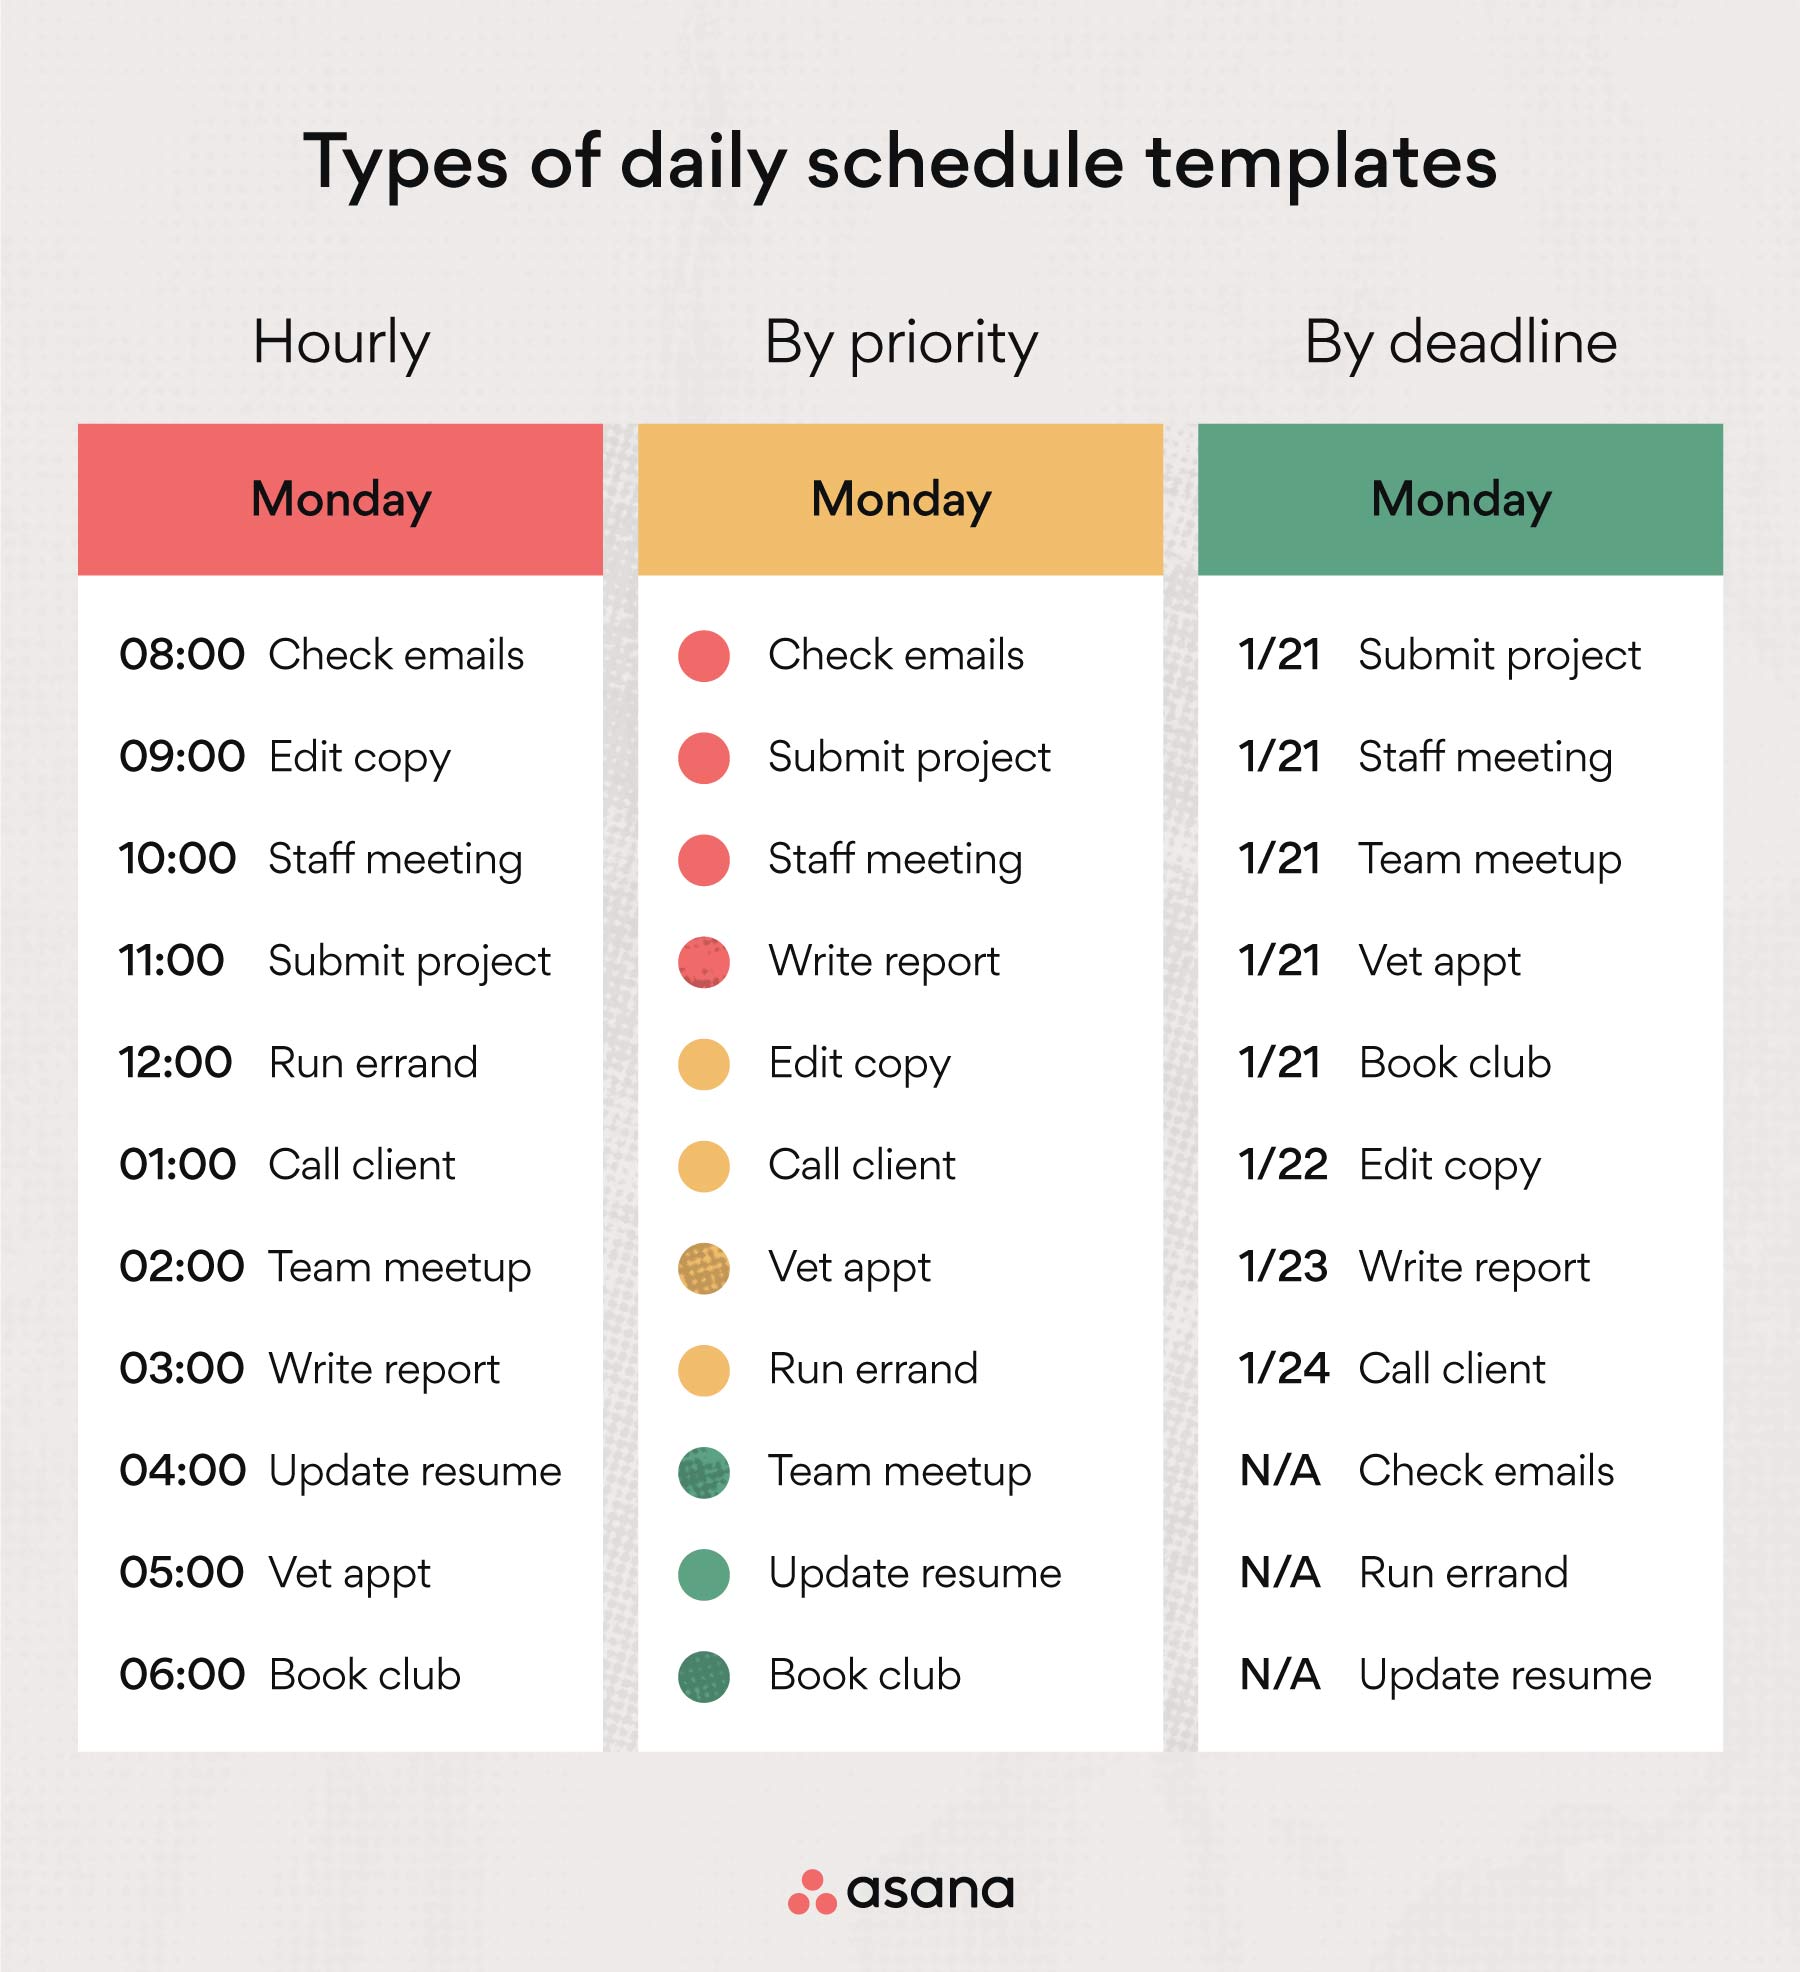 [inline illustration] types of daily schedule templates (infographic)